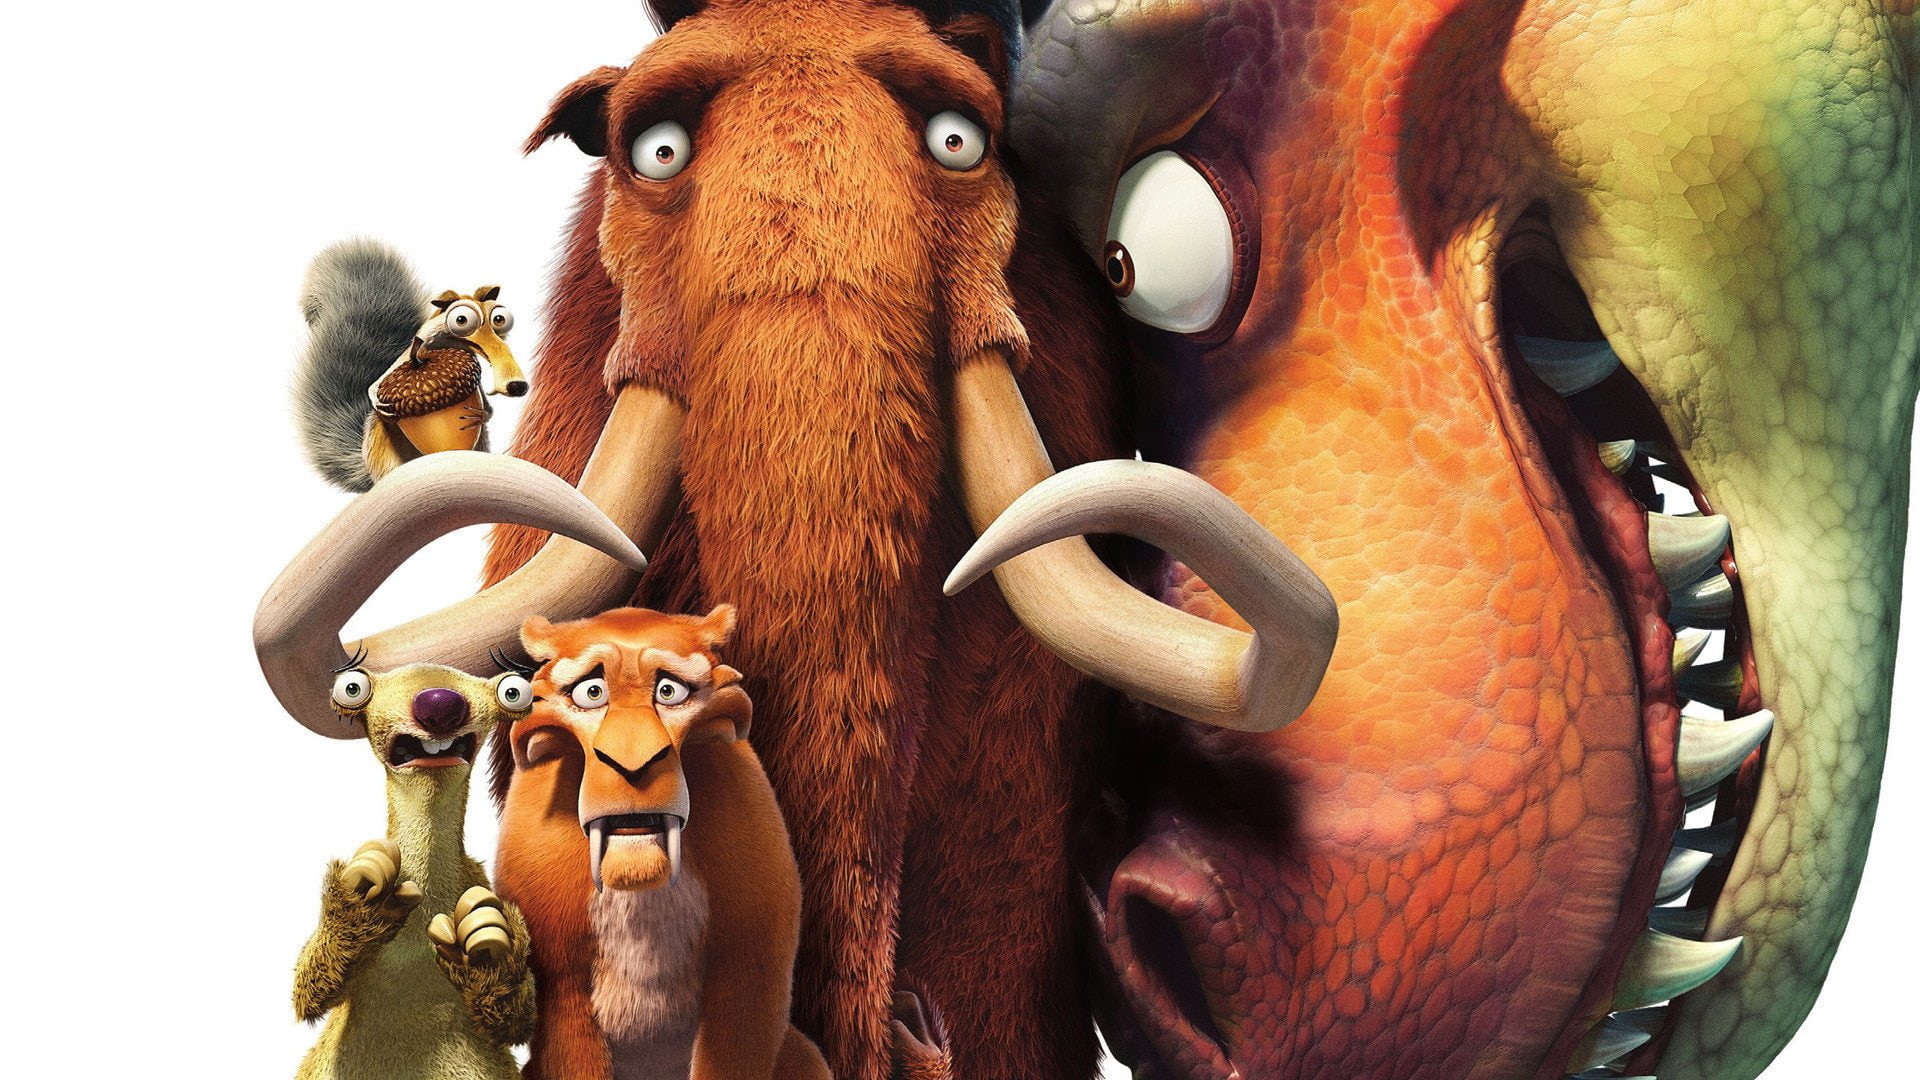 Ice Age, Ice Age: Dawn of the Dinosaurs, Scrat (Ice Age), animal themes